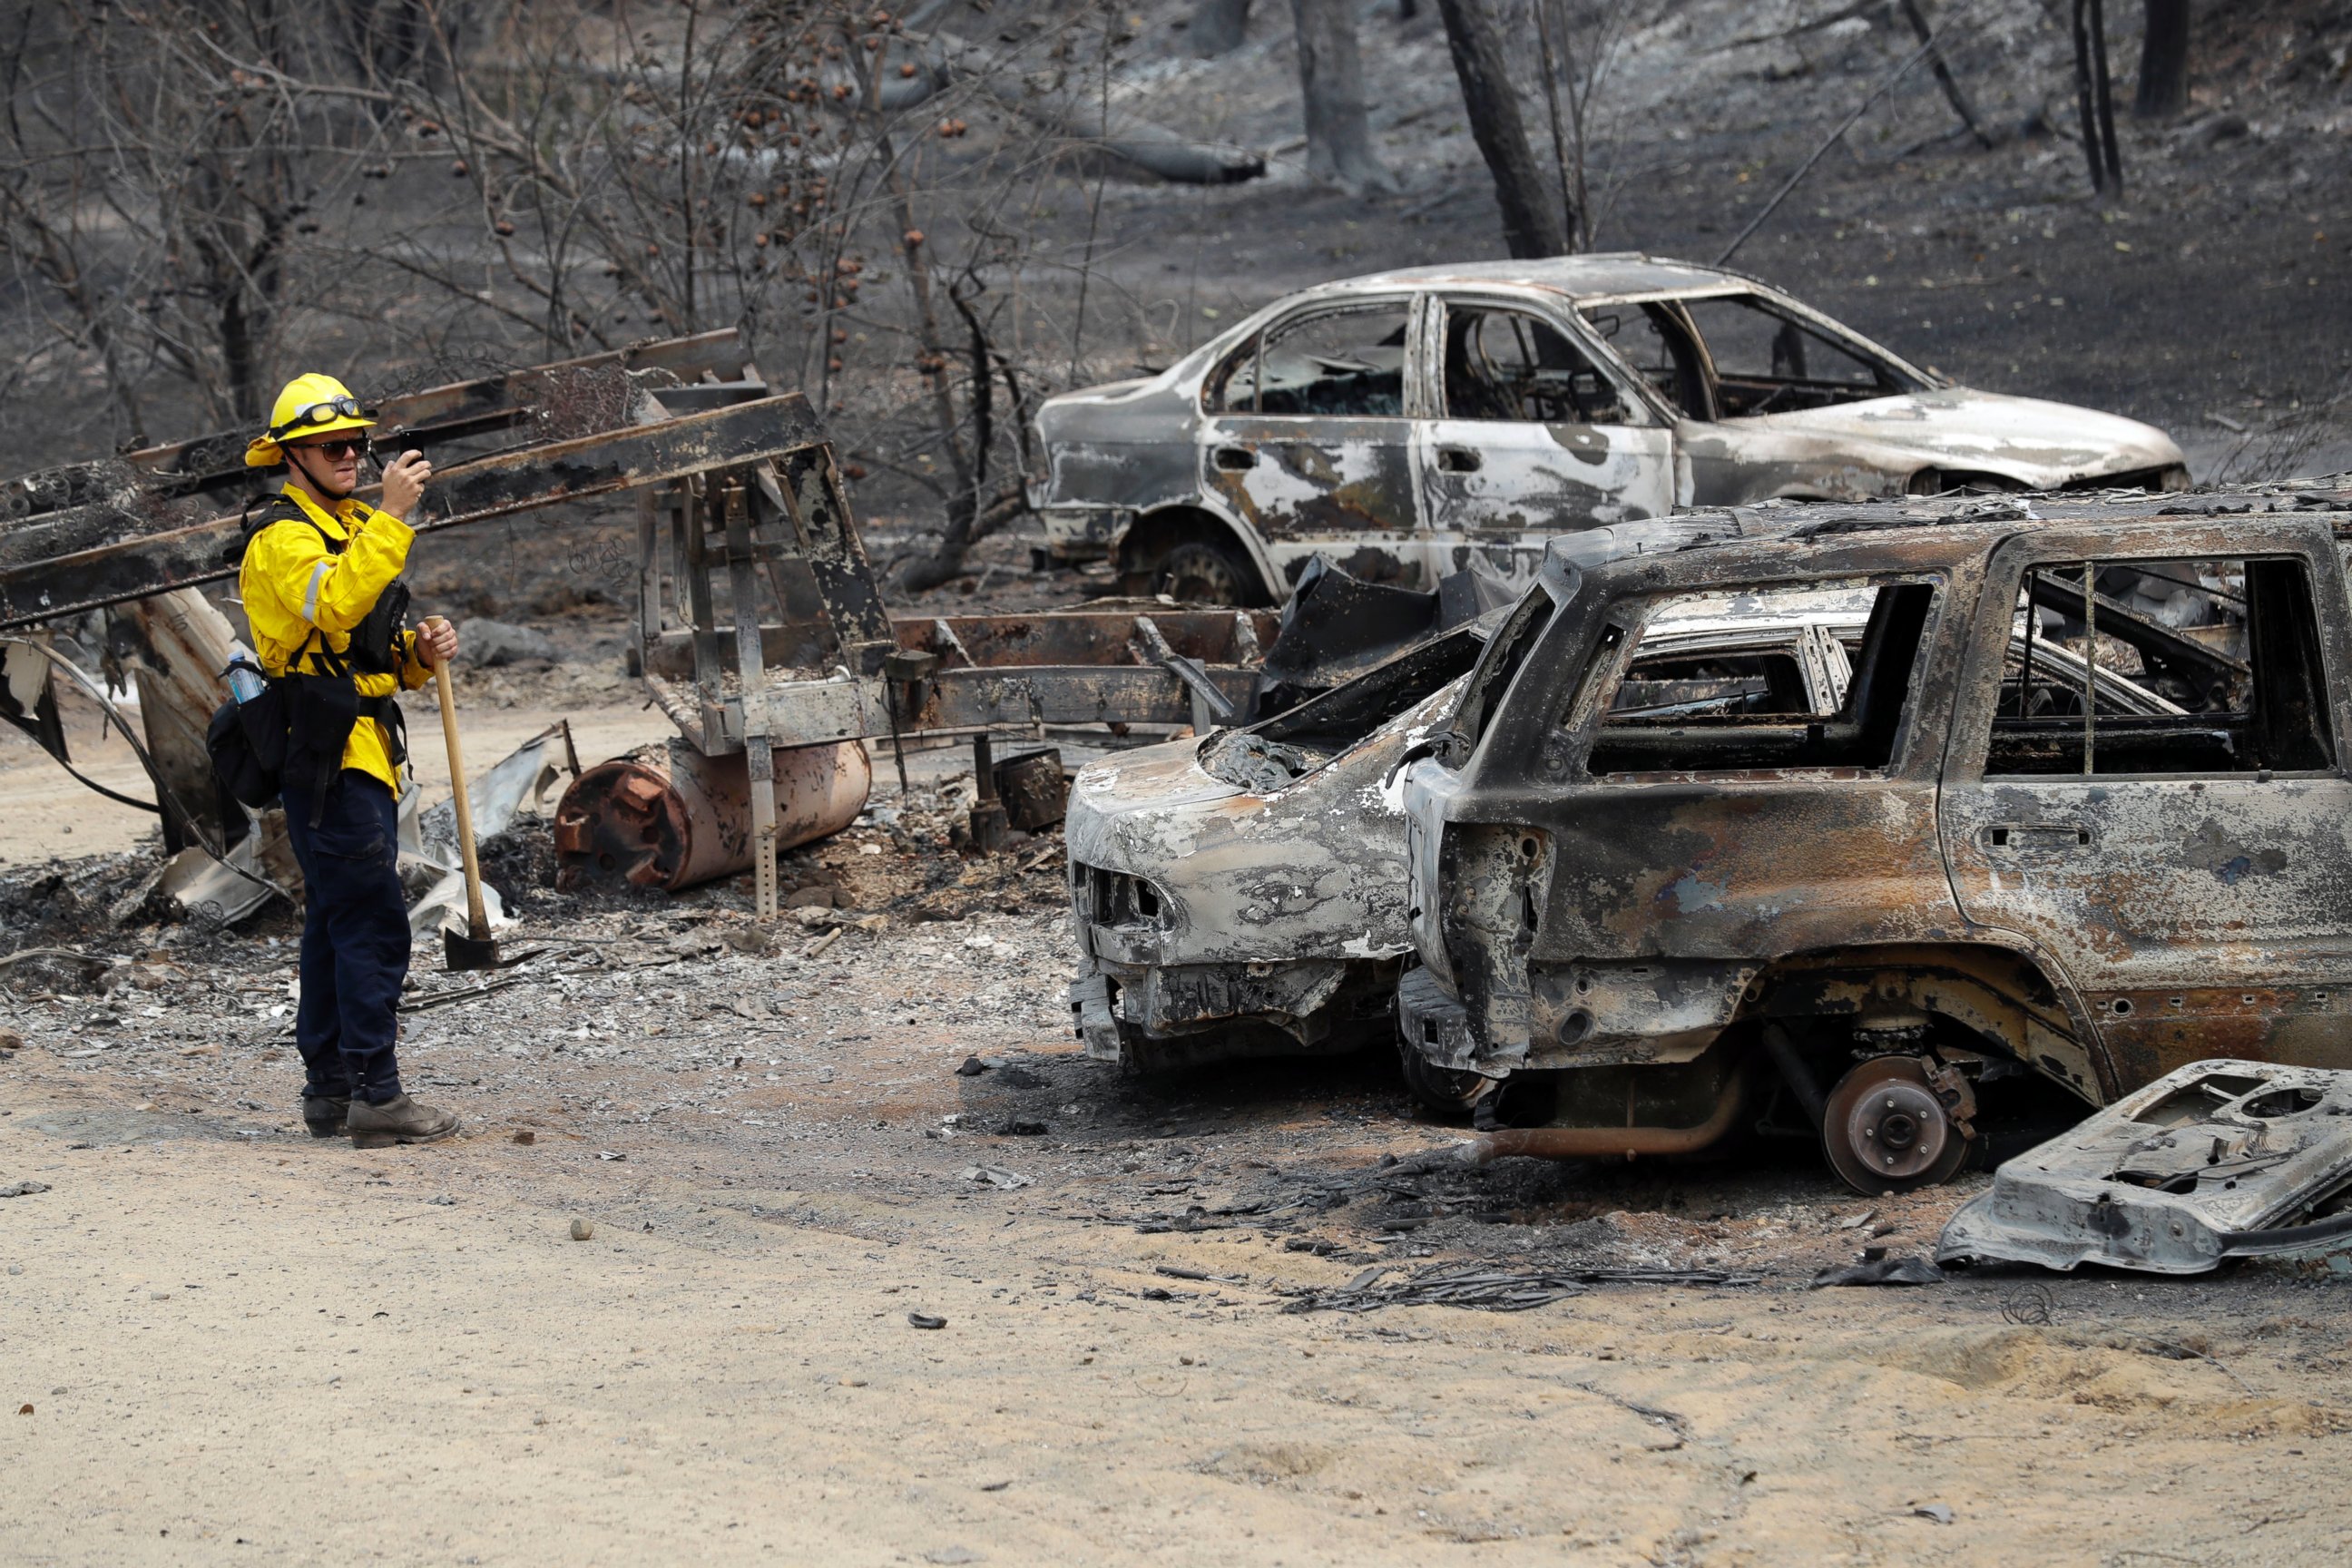 San Bernardino County Fire Department firefighter James Lippen takes photos of the damage caused by a wildfire, Sunday, July 29, 2018, in Keswick, Calif.